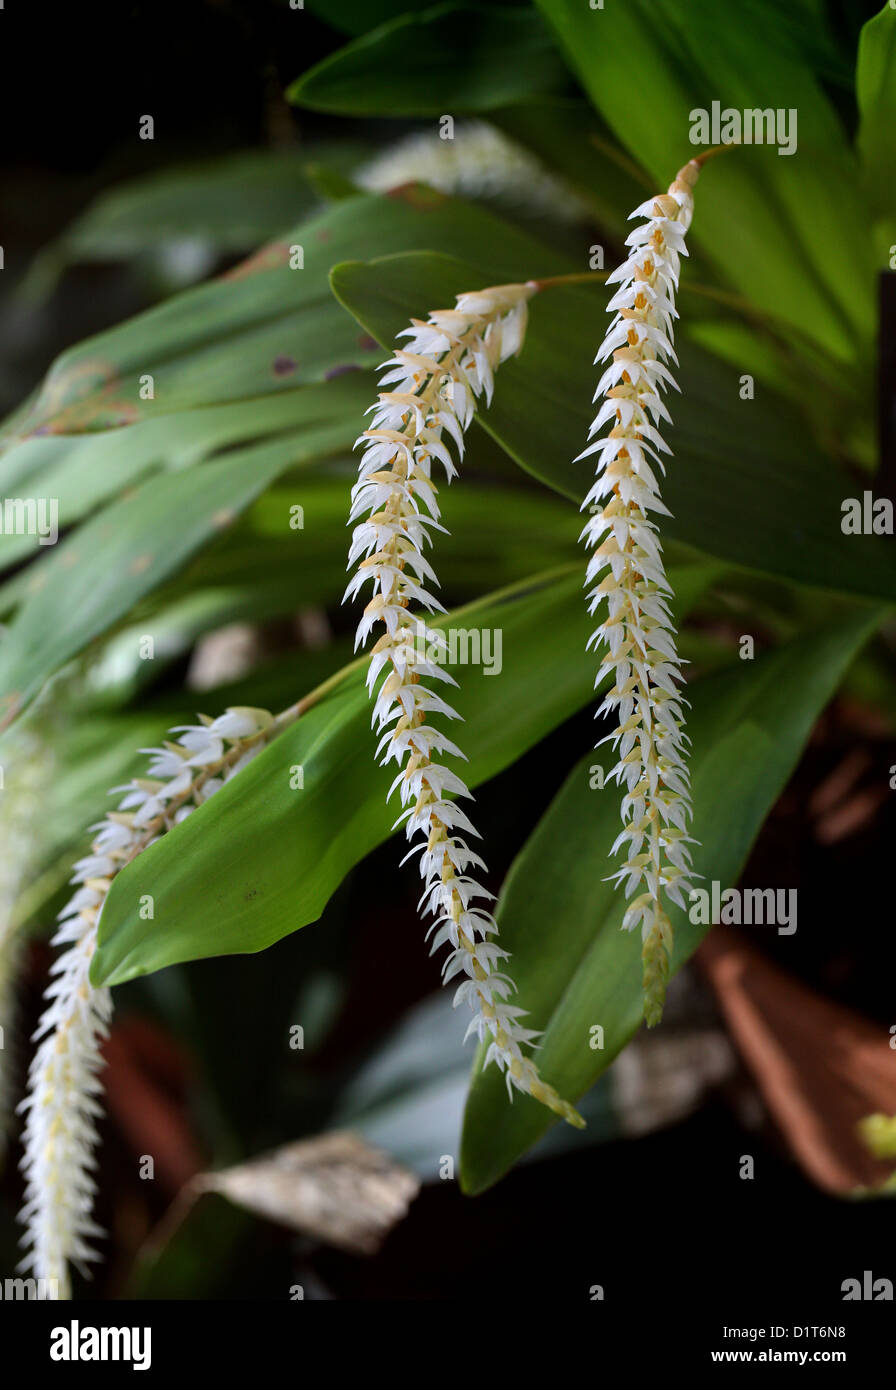 Hay-scented Orchid or Husk-like Dendrochilum, Dendrochilum glumaceum, Orchidaceae. Philippines, South East Asia. Stock Photo